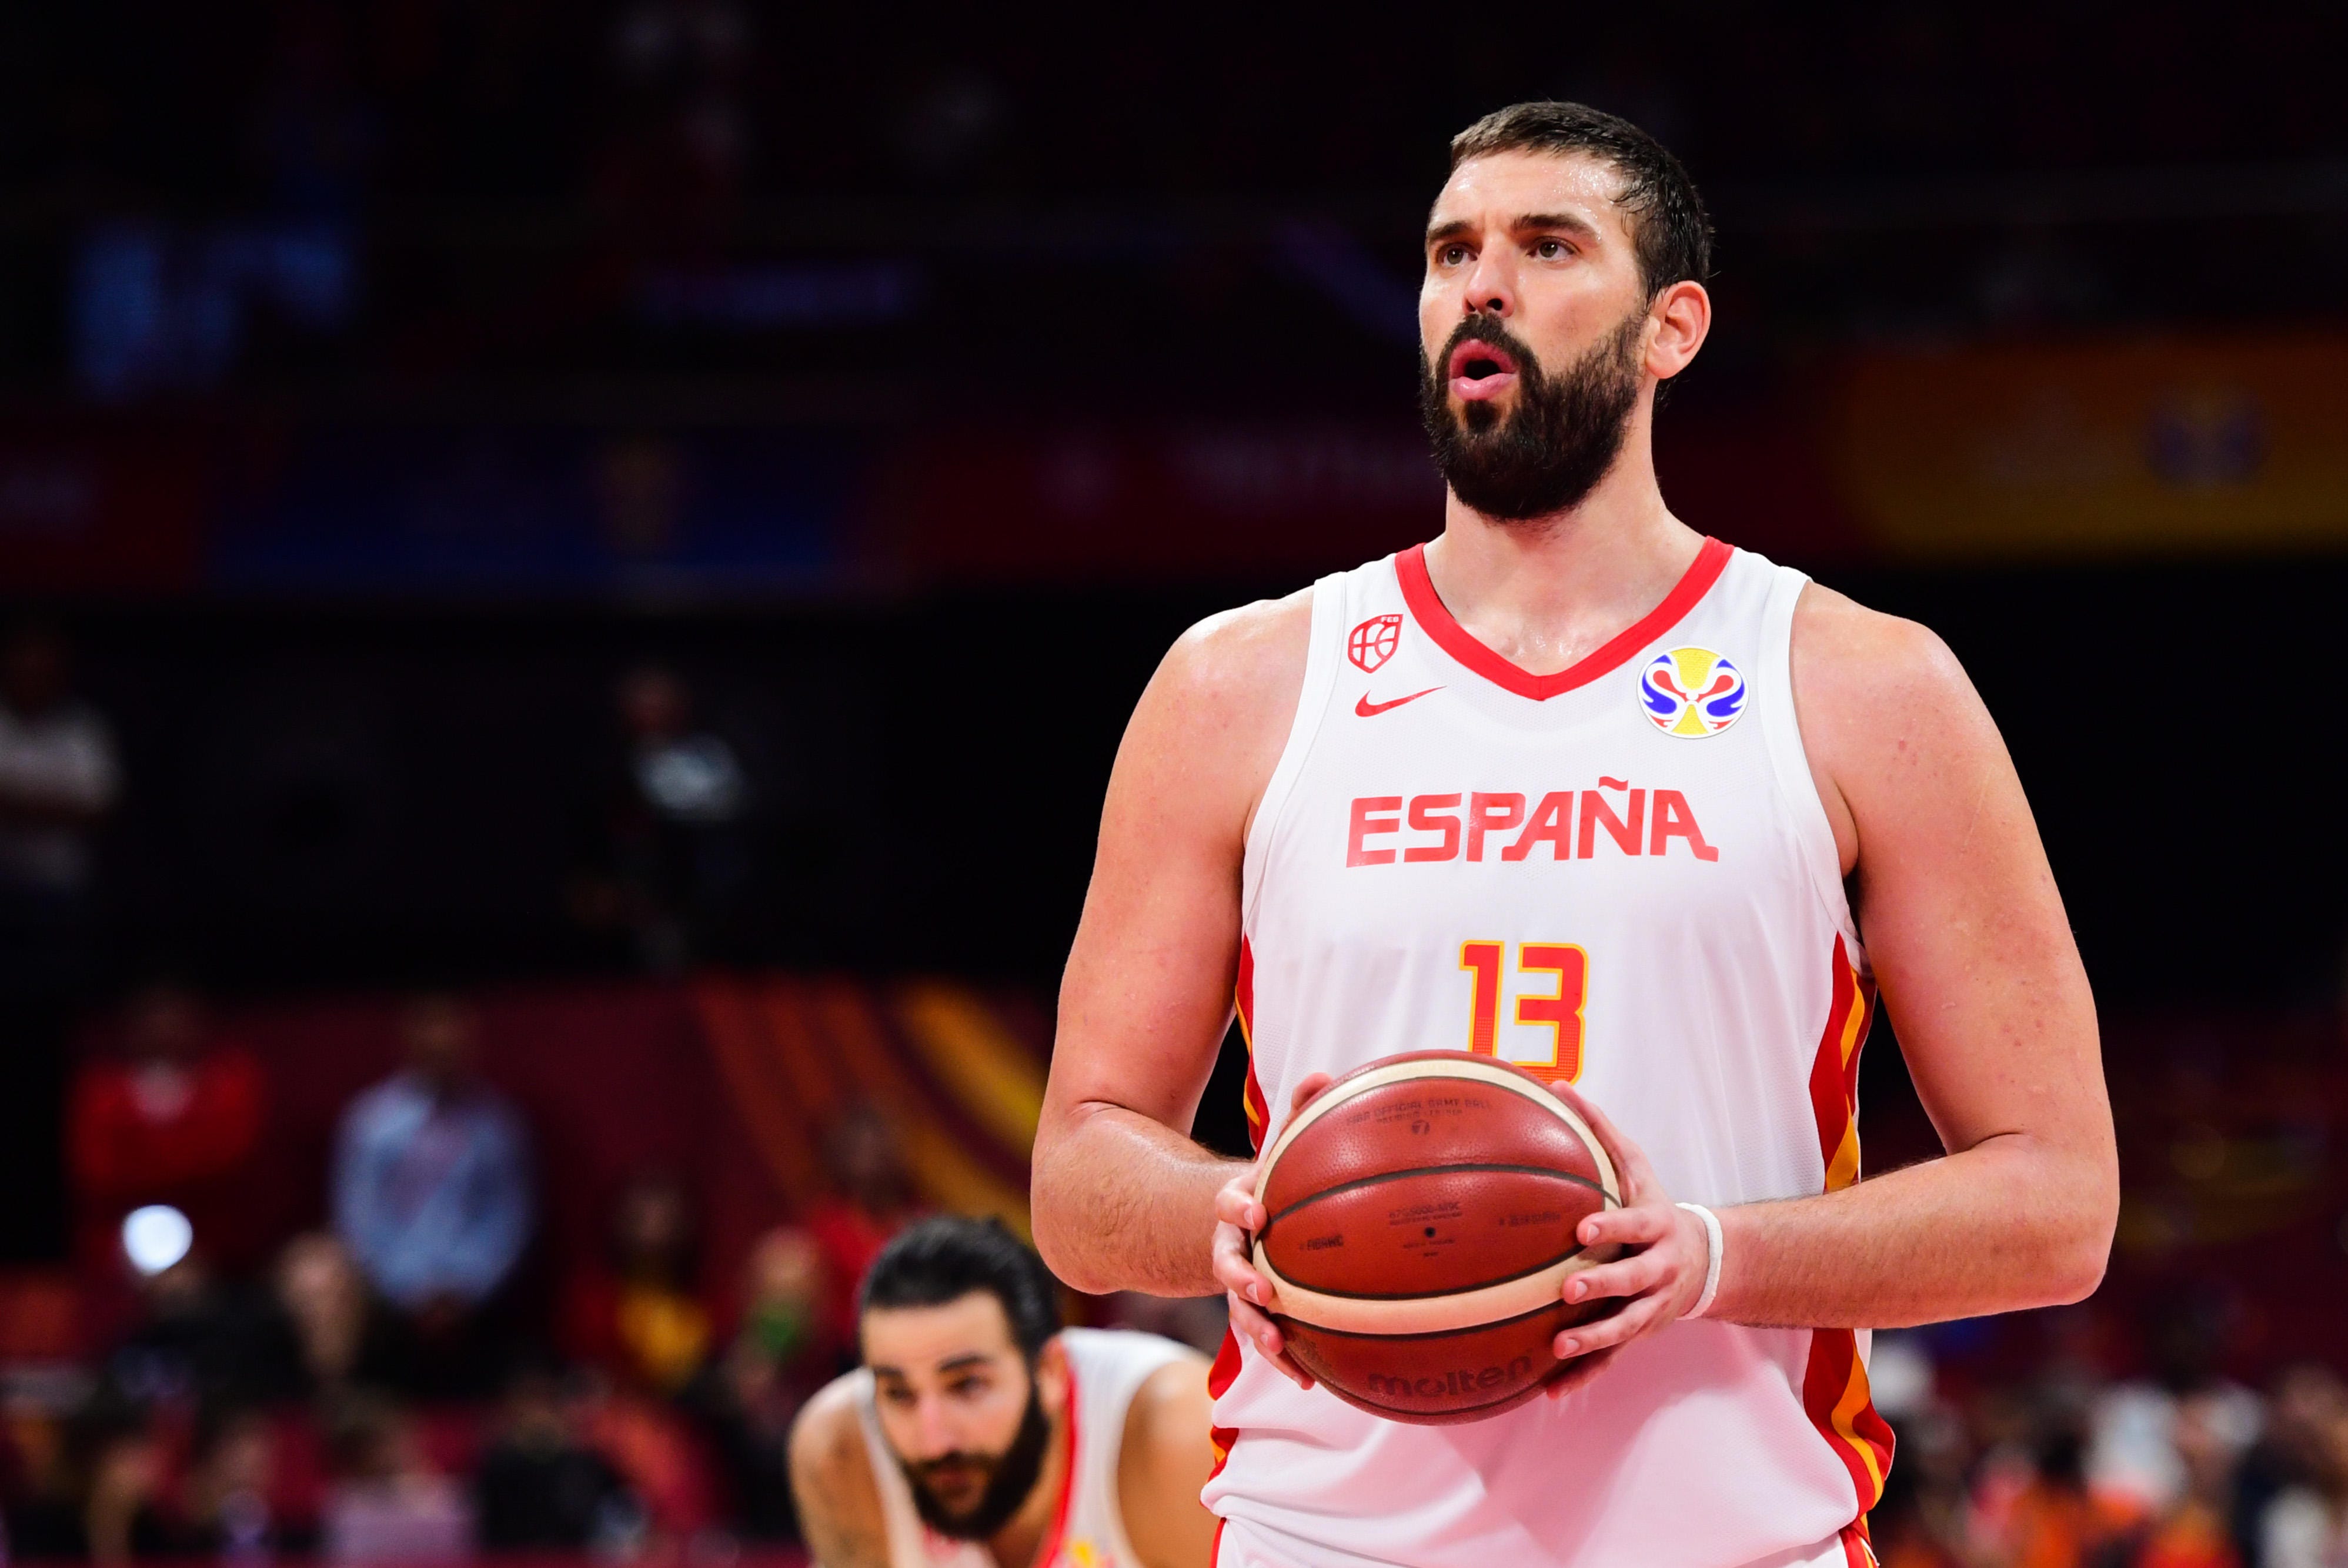 FIBA Basketball World Cup 2019: How to watch the final between Spain and Argentina